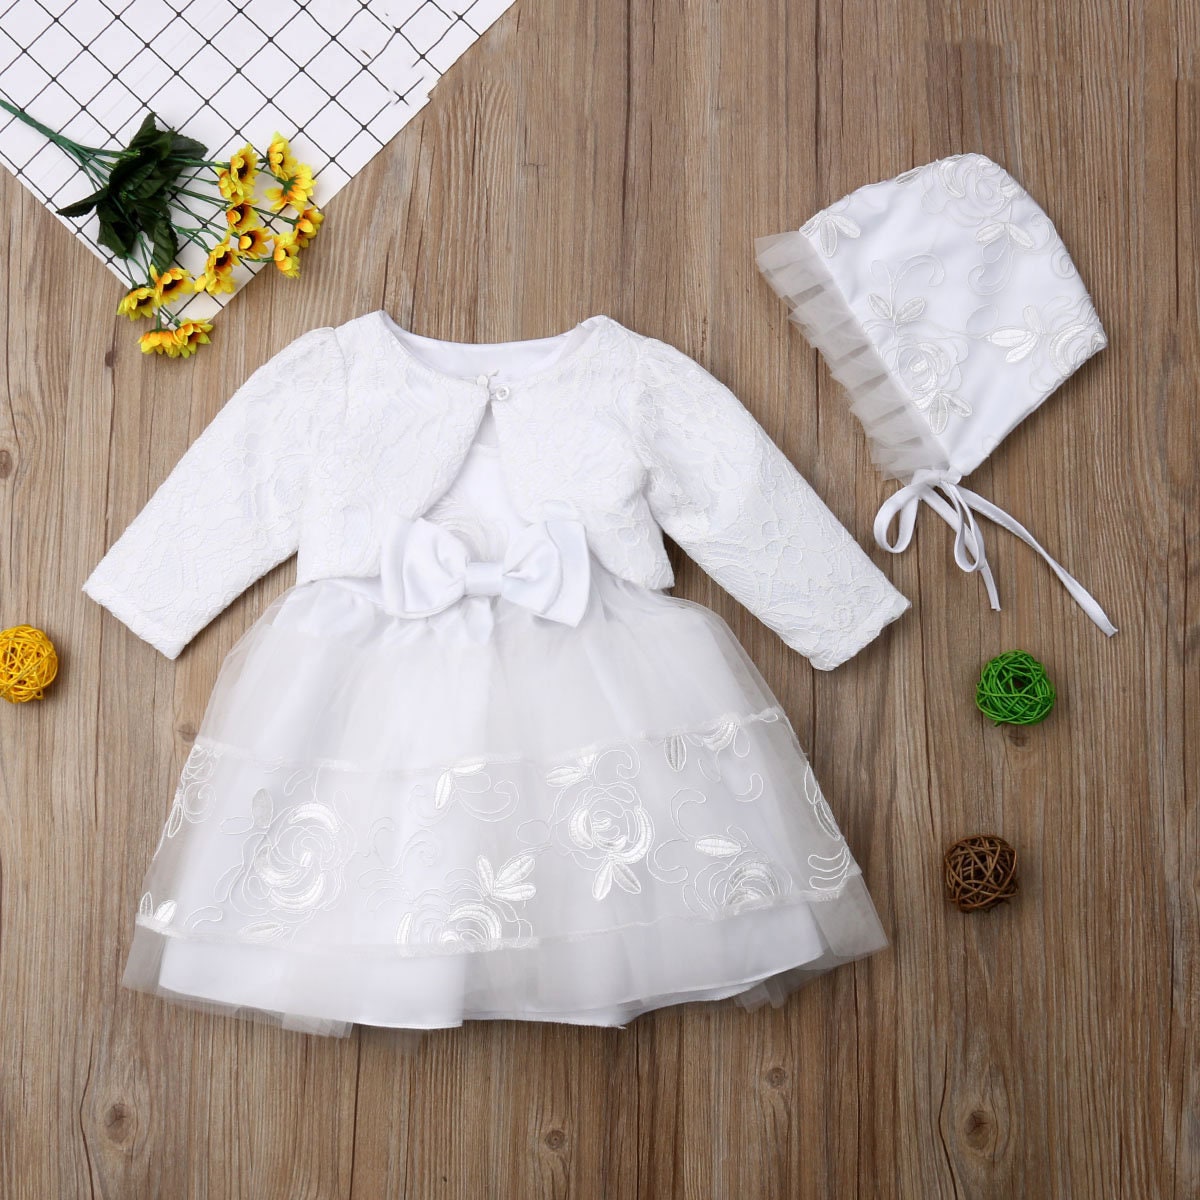 Baby Embroidery Dress Christening Bridesmaid Bow Wedding | Etsy